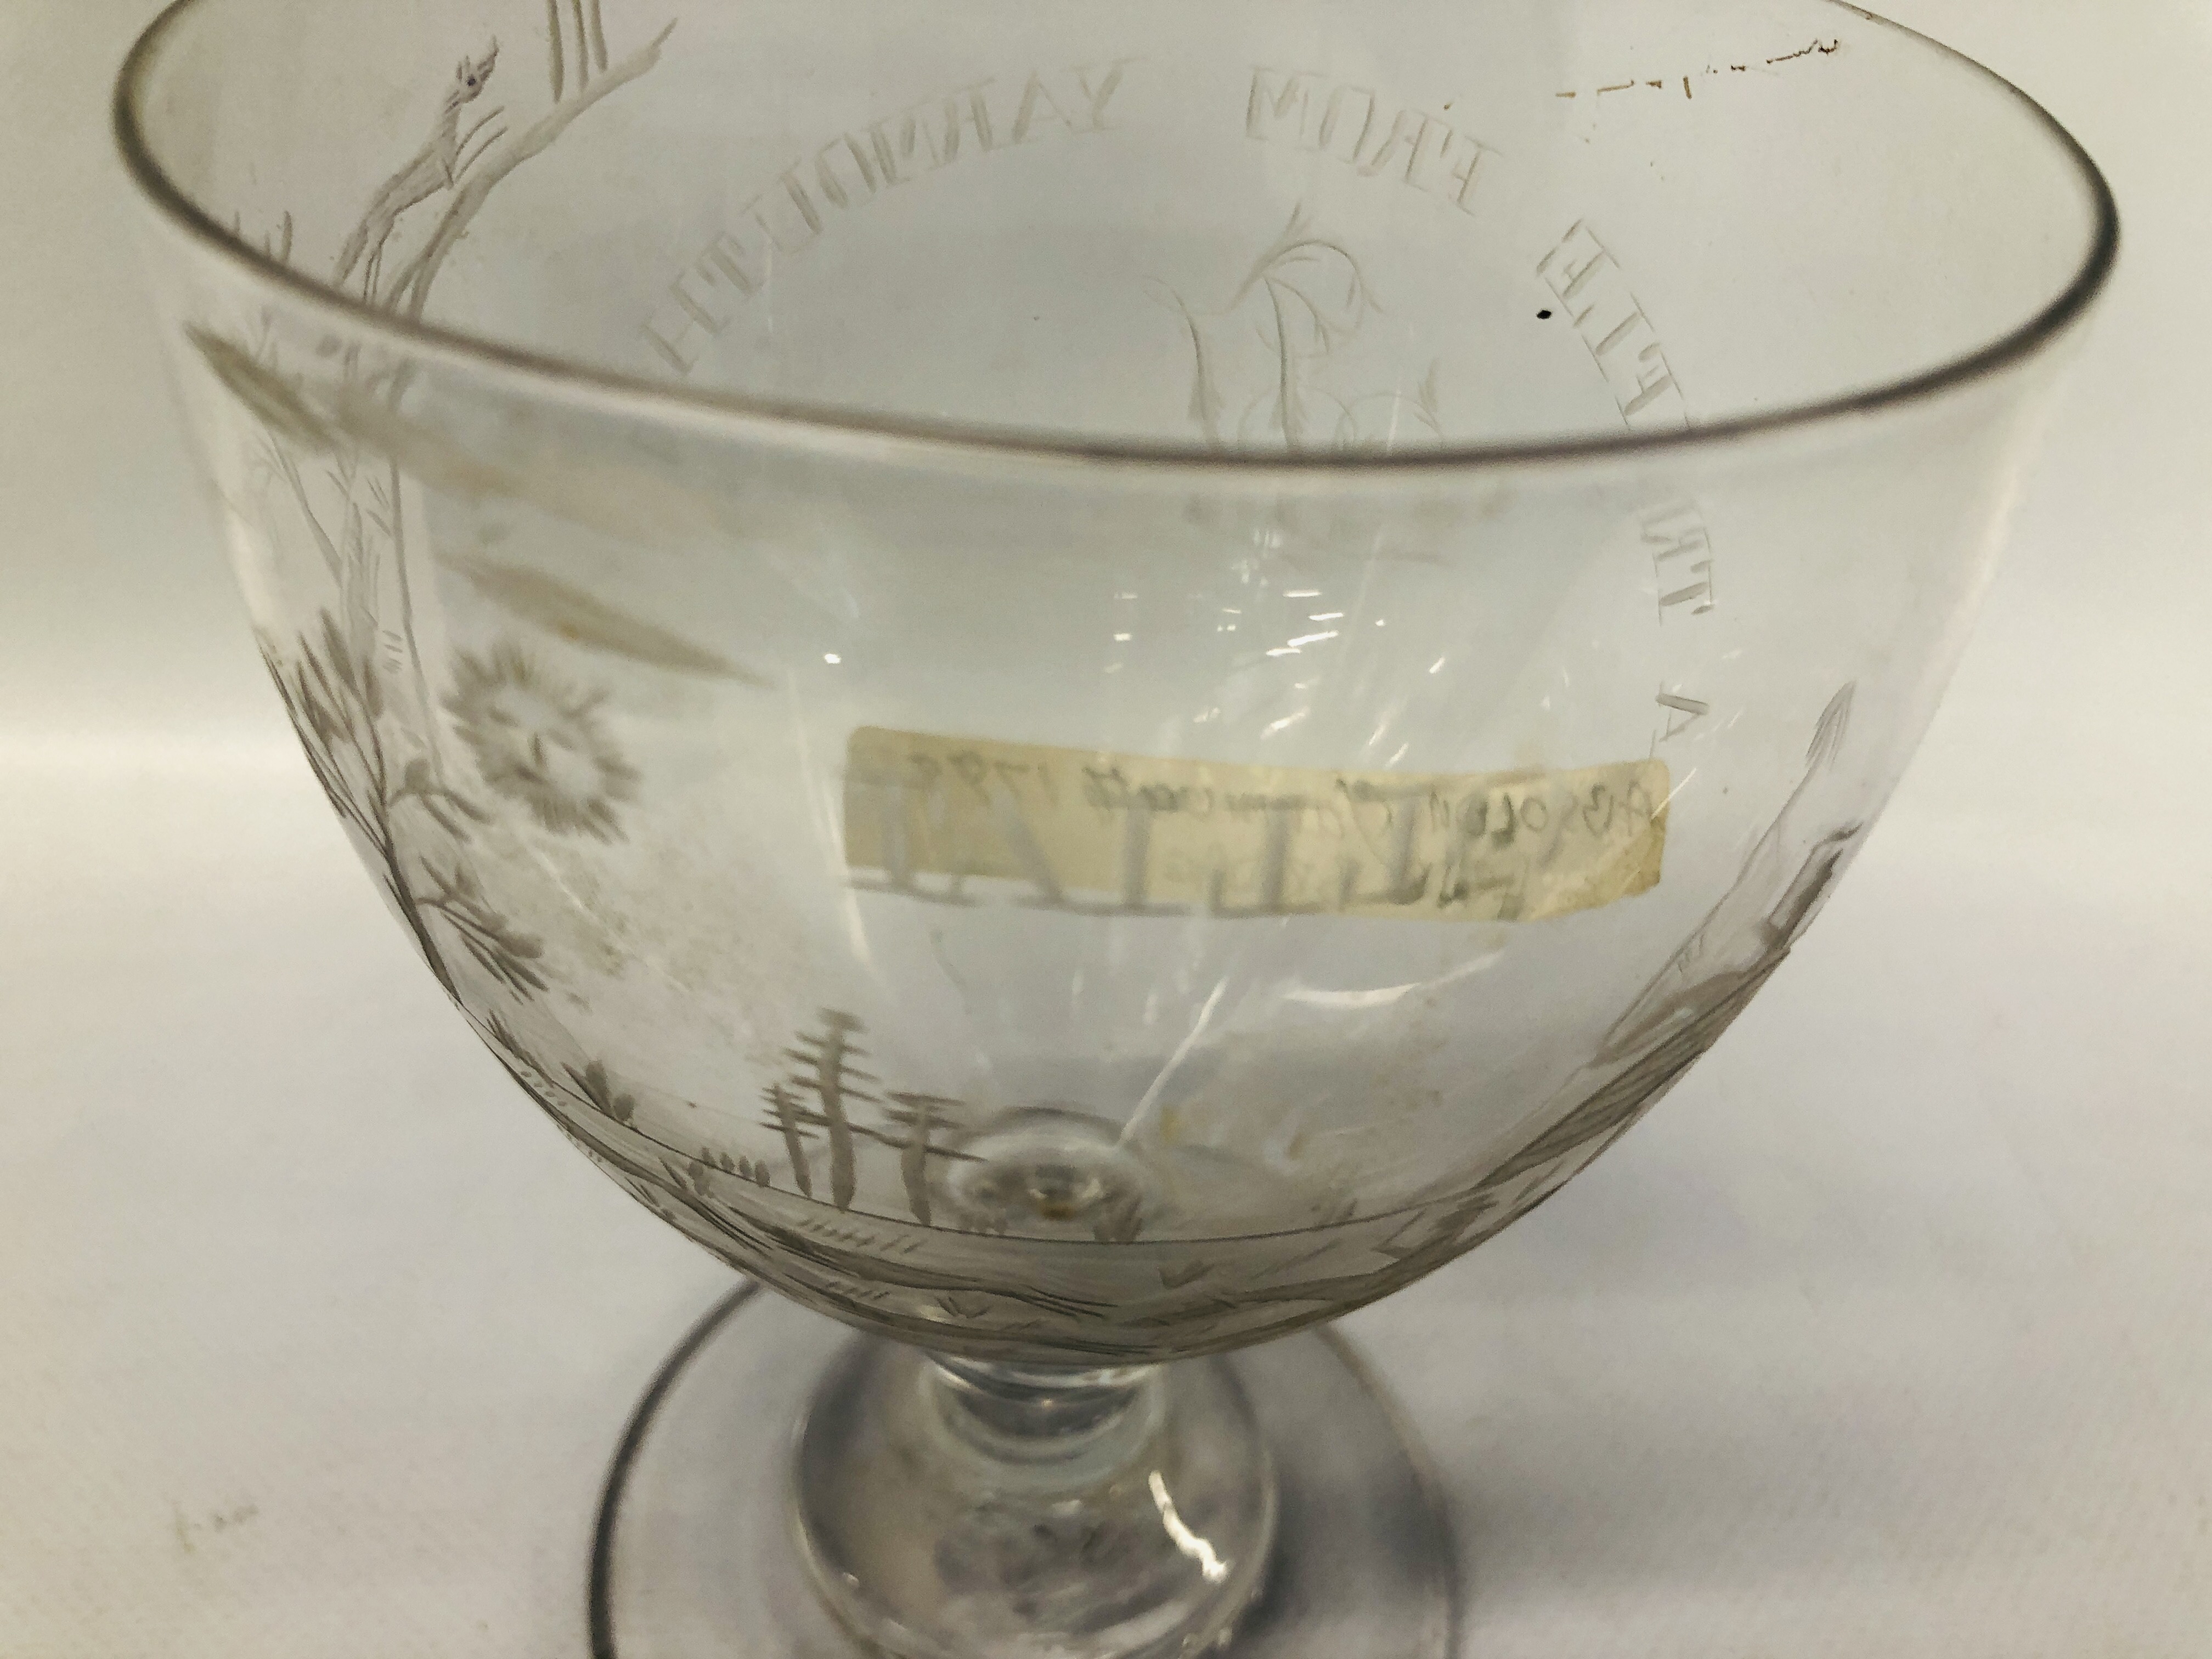 A RUMNER ENGRAVED BY JOHN ABSALON OF GREAT YARMOUTH - ENGRAVED A "TRIFLE FROM YARMOUTH TALLIO" WITH - Image 2 of 8